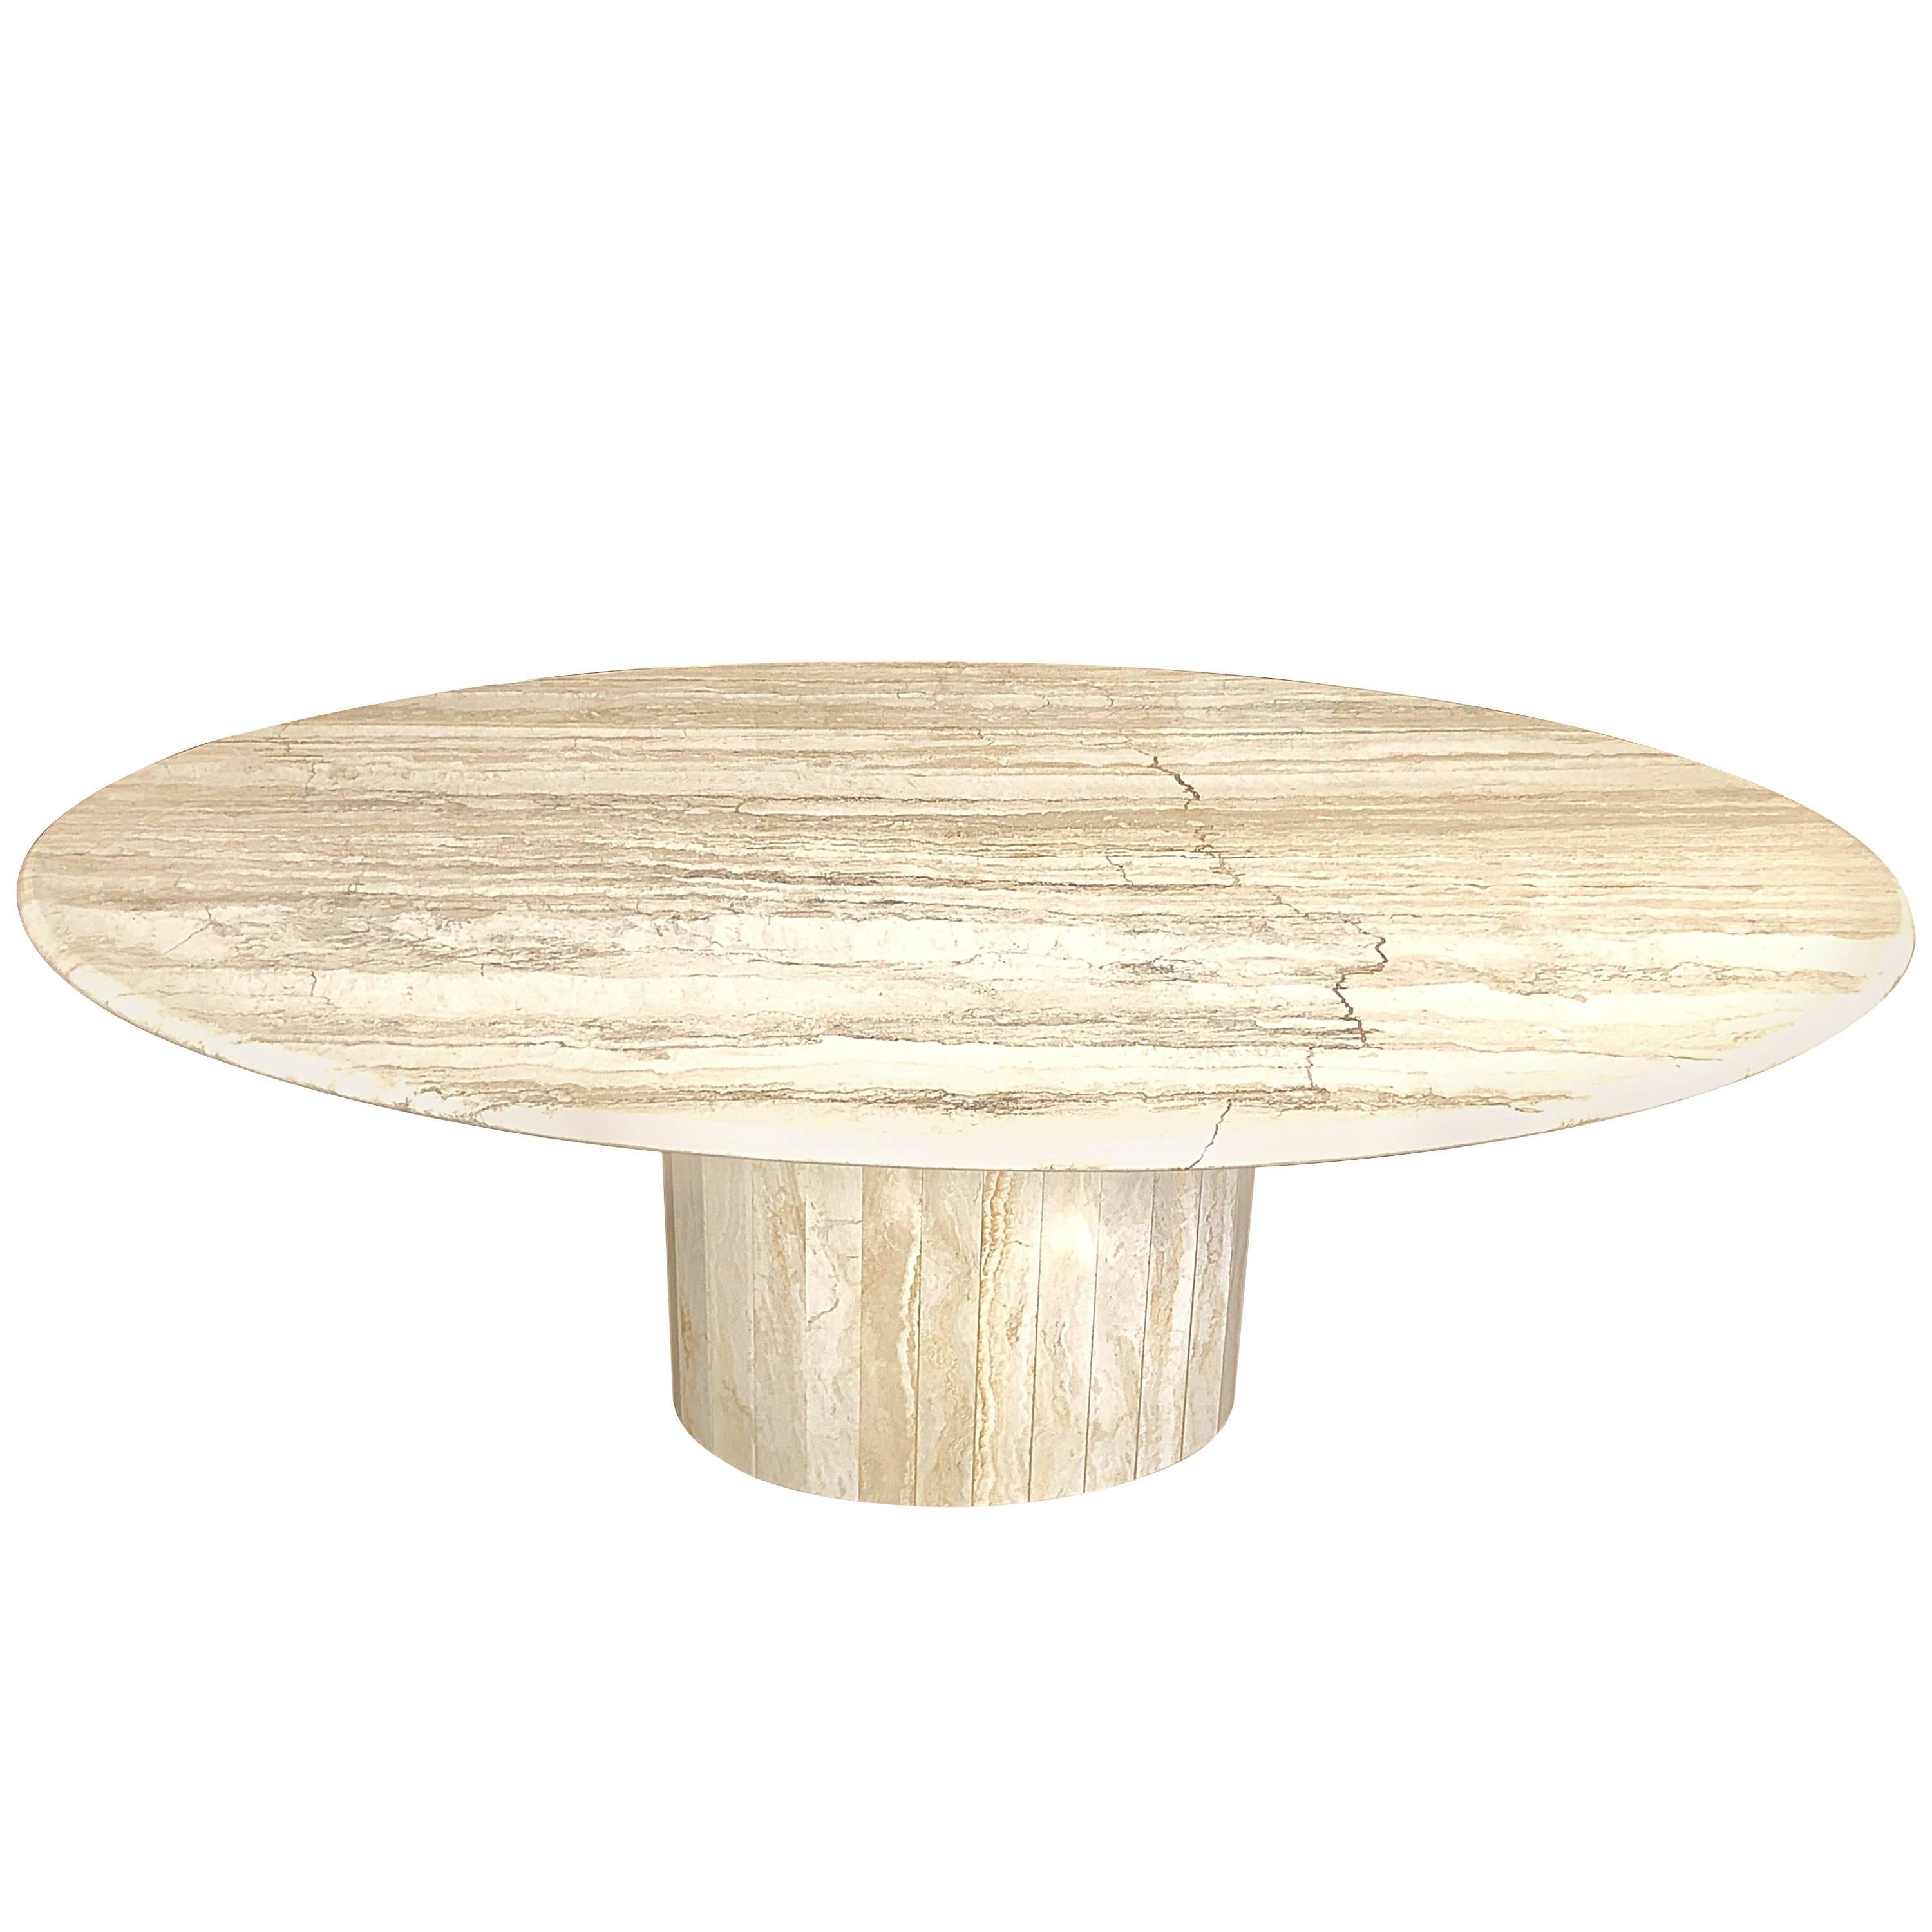 Italian Travertine Oval Dining Table by Ello